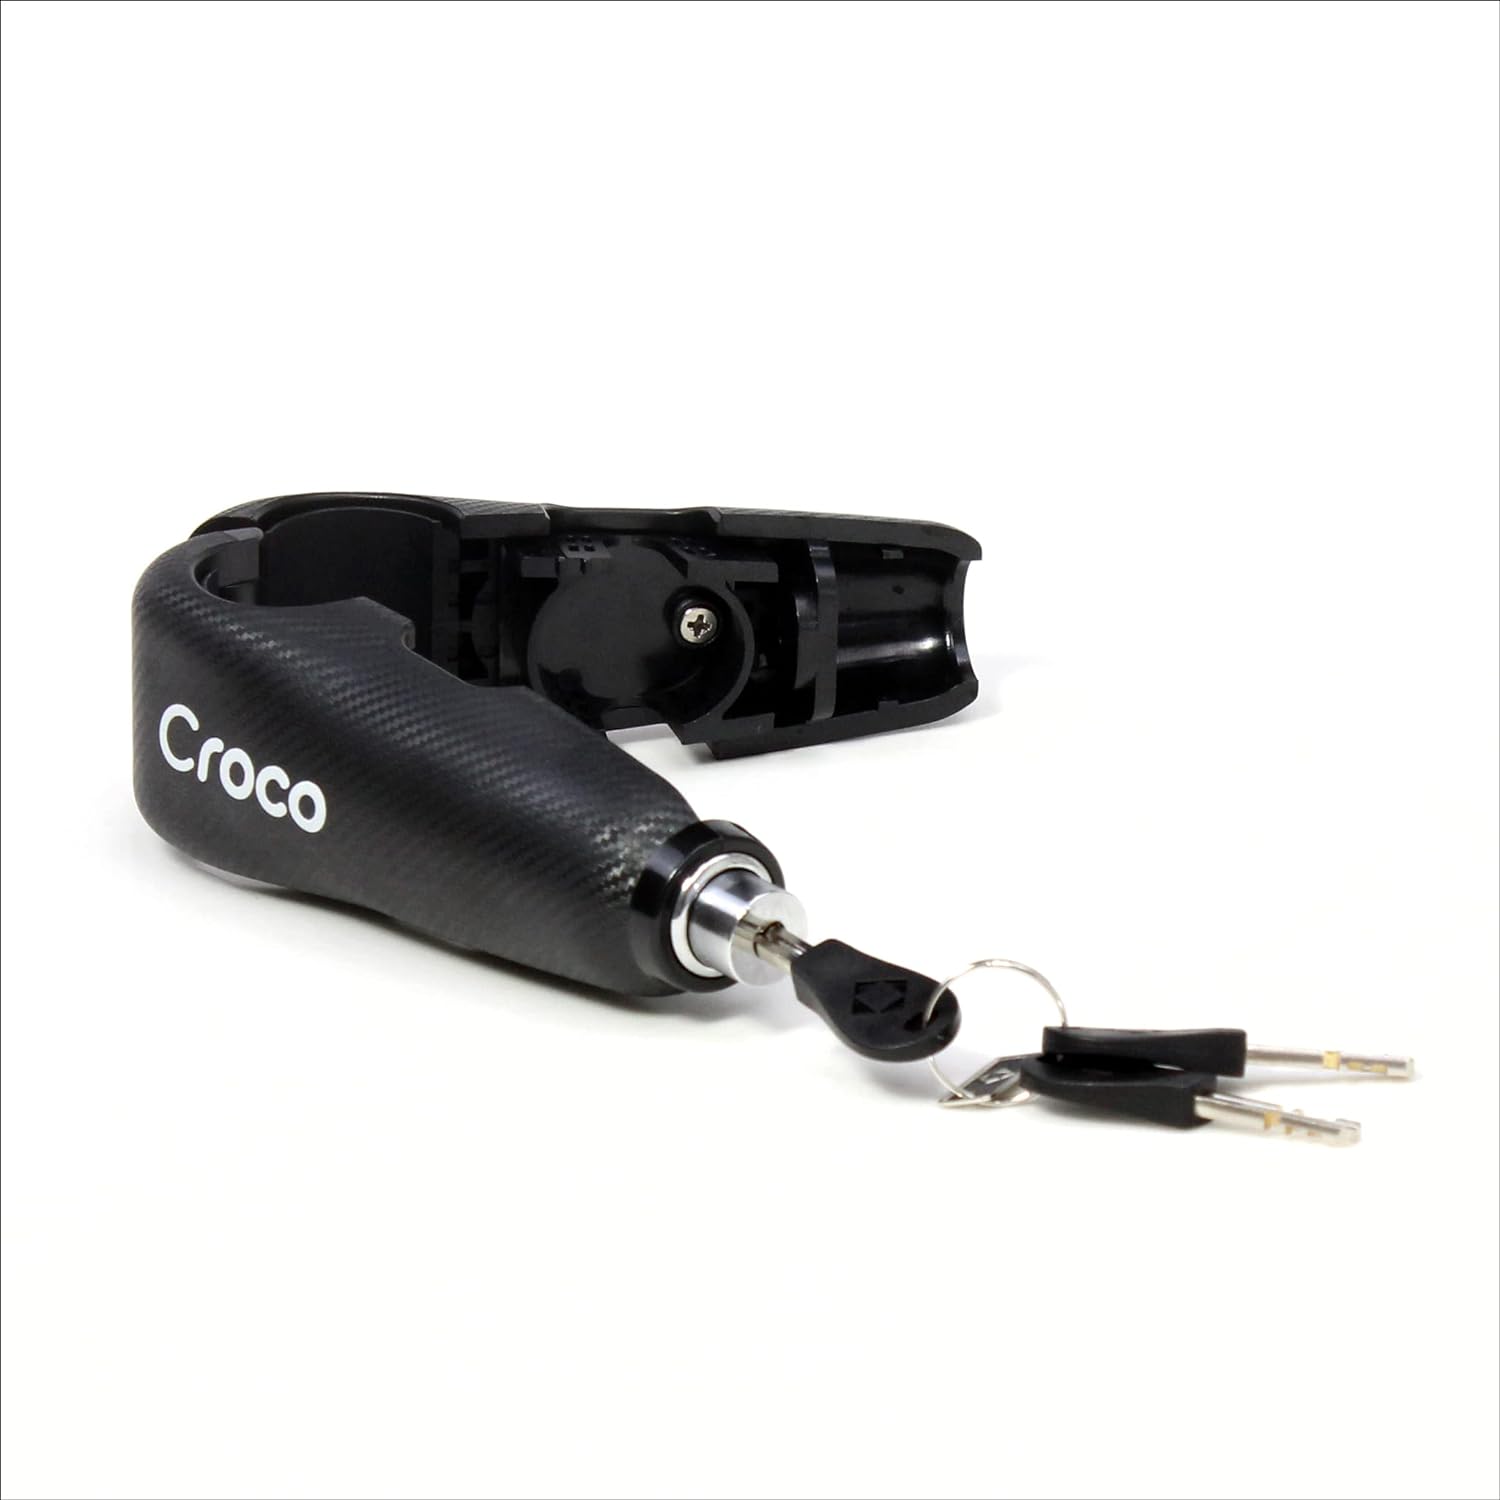 The image presents a black Croco bike lock with an inserted key, partially revealing its internal mechanism. The lock is textured to resemble carbon fiber, and the Croco branding is prominently displayed. It seems to be a bar lock, commonly used for bicycles, which implies a lightweight yet secure design. The photo emphasizes the lock's use-case scenario and gives a good impression of how it operates with the key in place